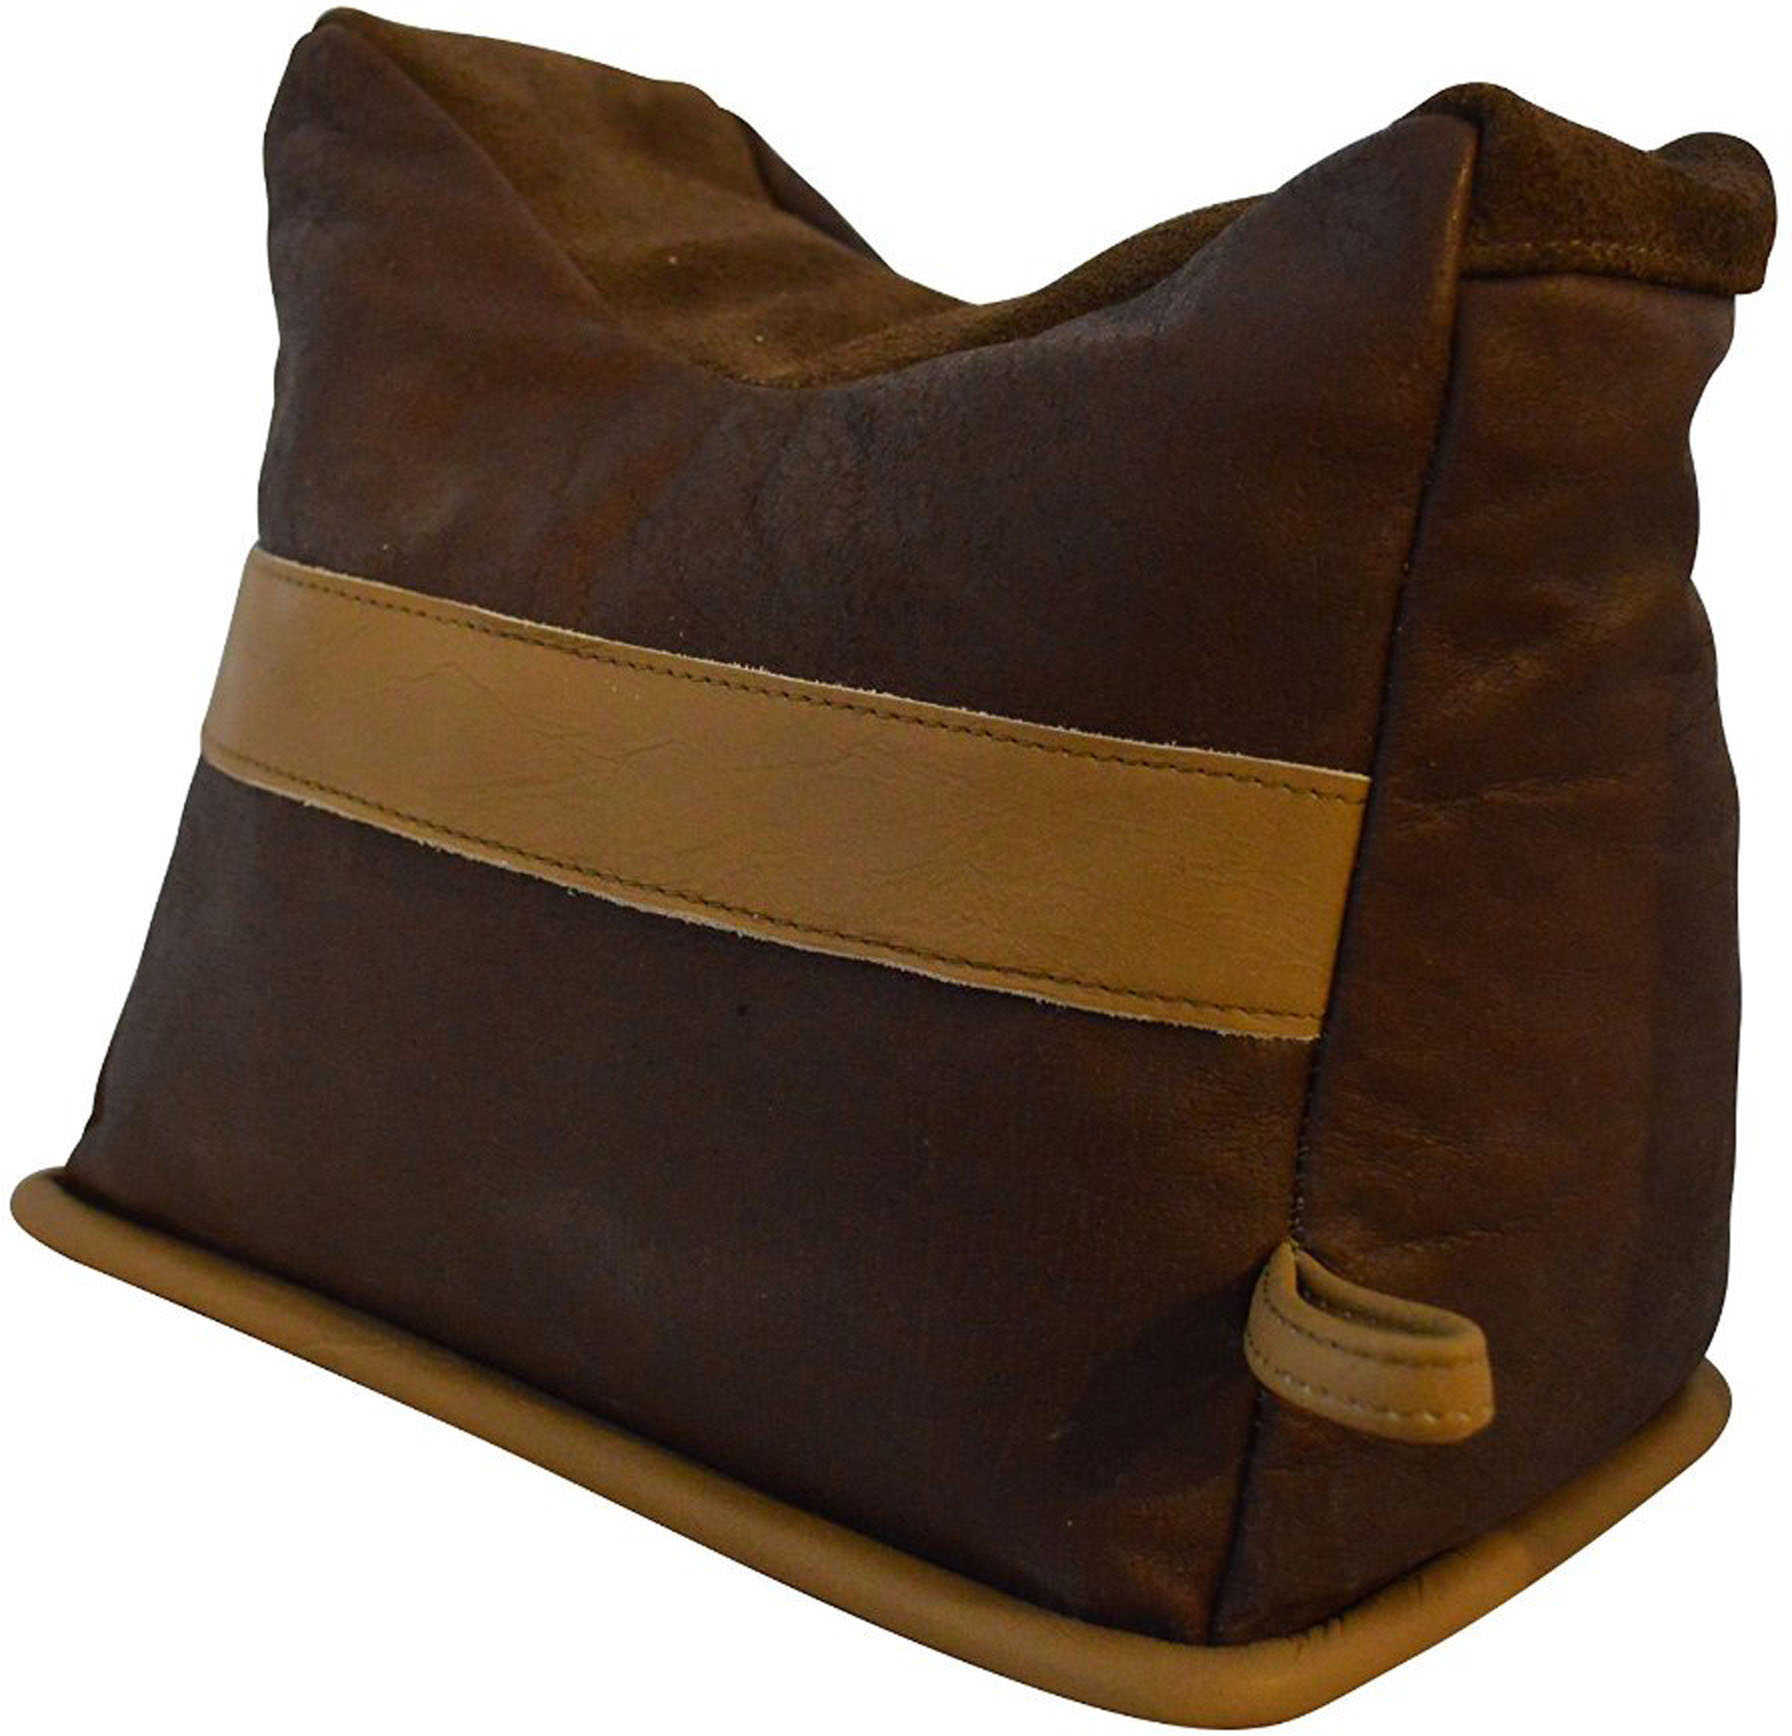 BENCHMASTER BENCH BAG LARGE ALL LEATHER Model: BMALBBLF